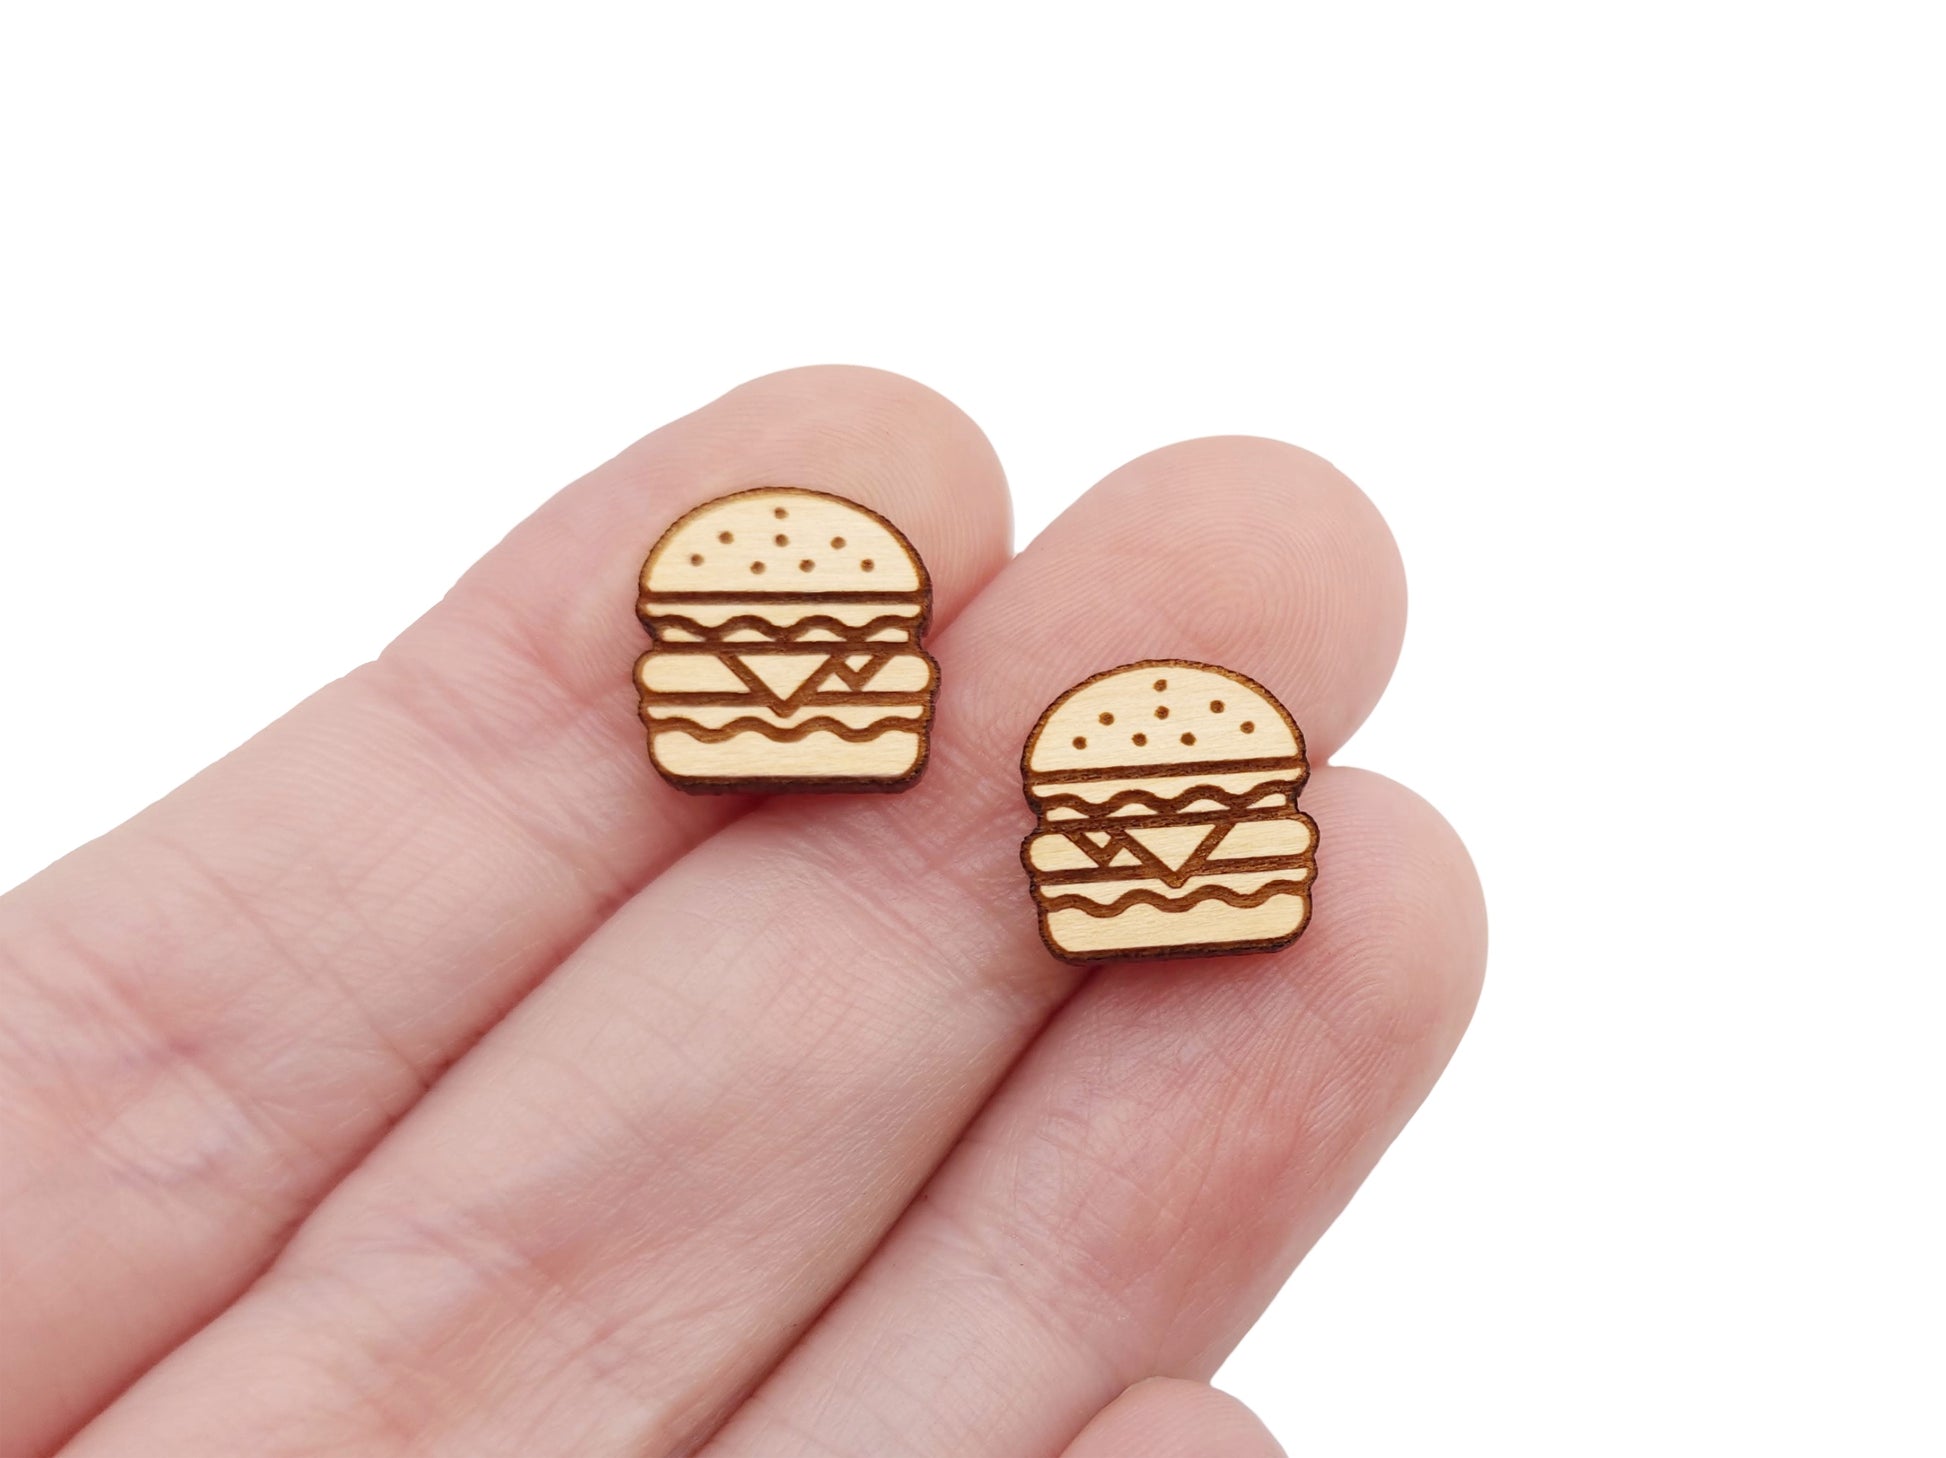 a hand holding a pair of wooden cabochon stud earring blanks cut and engraved to look like a cheeseburger